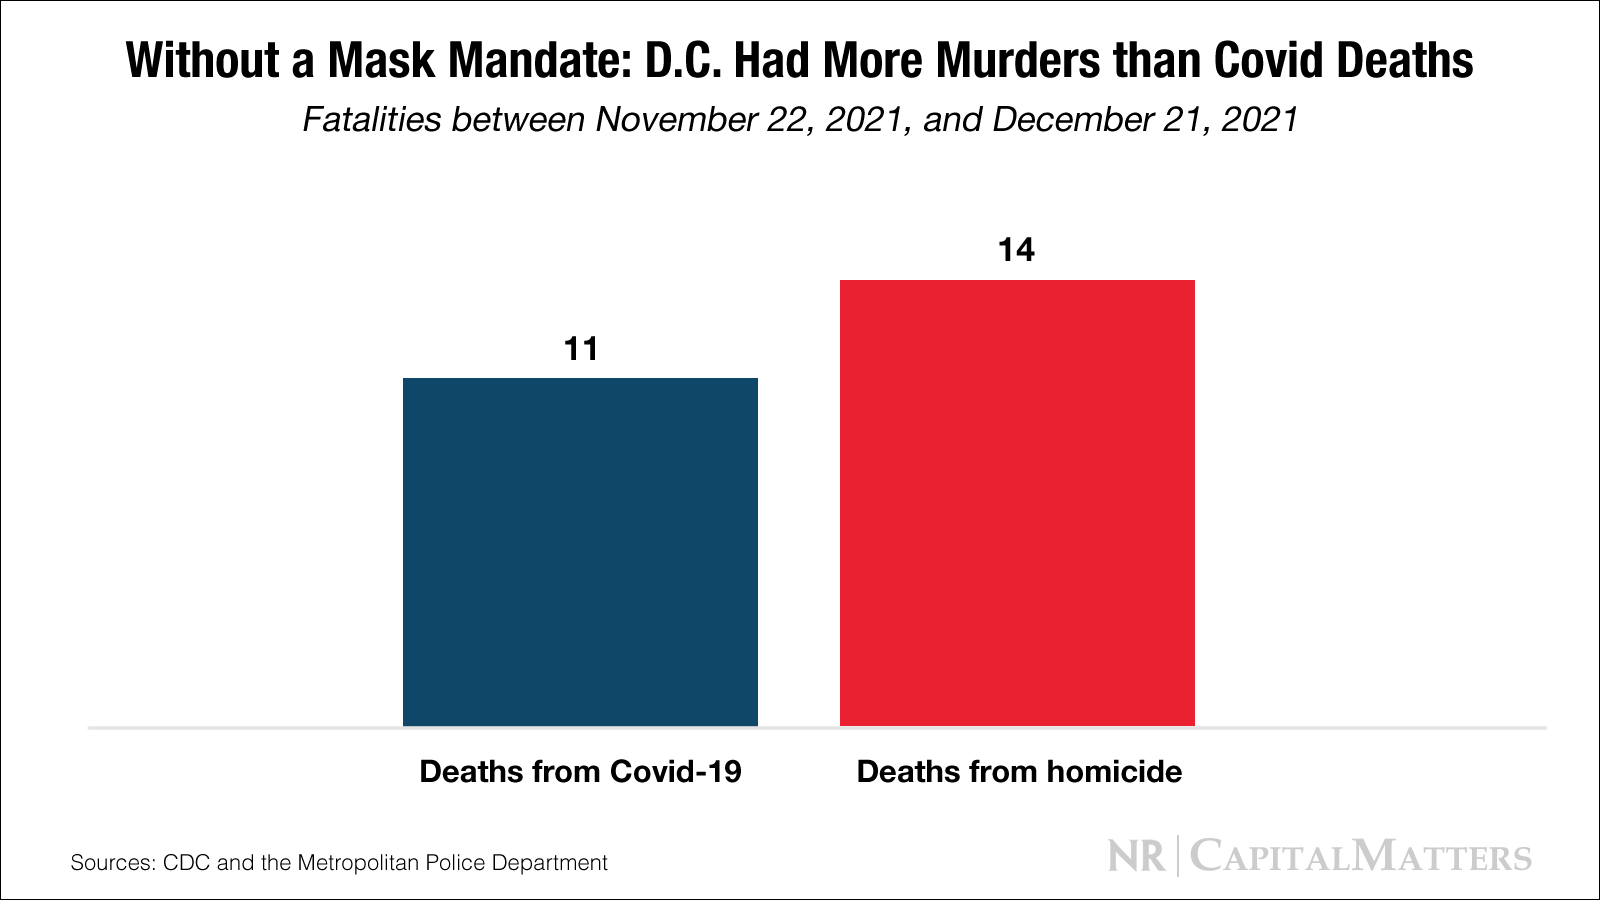 Without a Mask Mandate, D.C. Had More Murders than Deaths from Covid